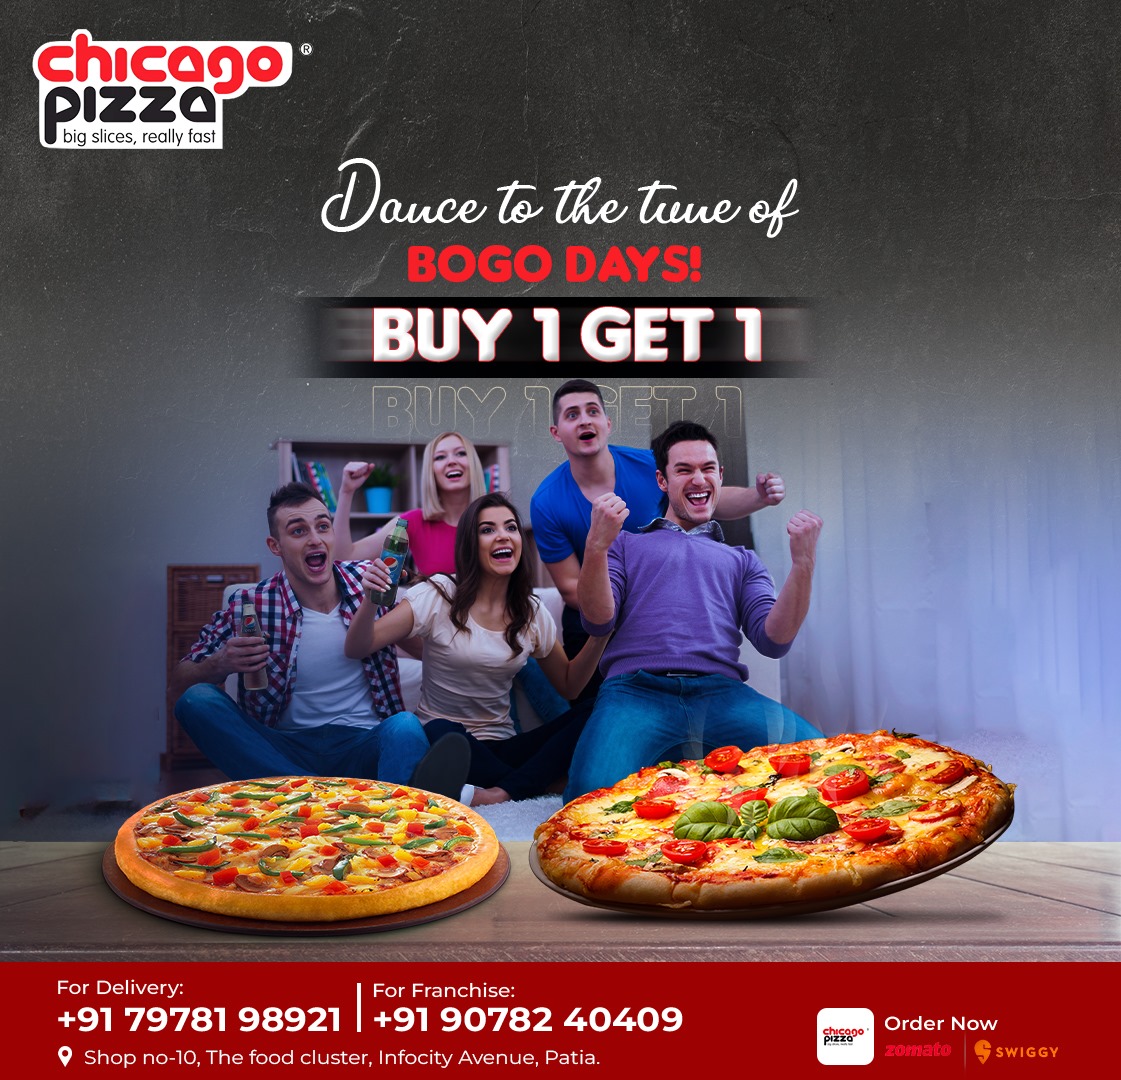 🍕Watch out for BOGO Days at Chicago Pizza!

#pizza #pizzapizza #buy1get1 #offers #chicagopizza